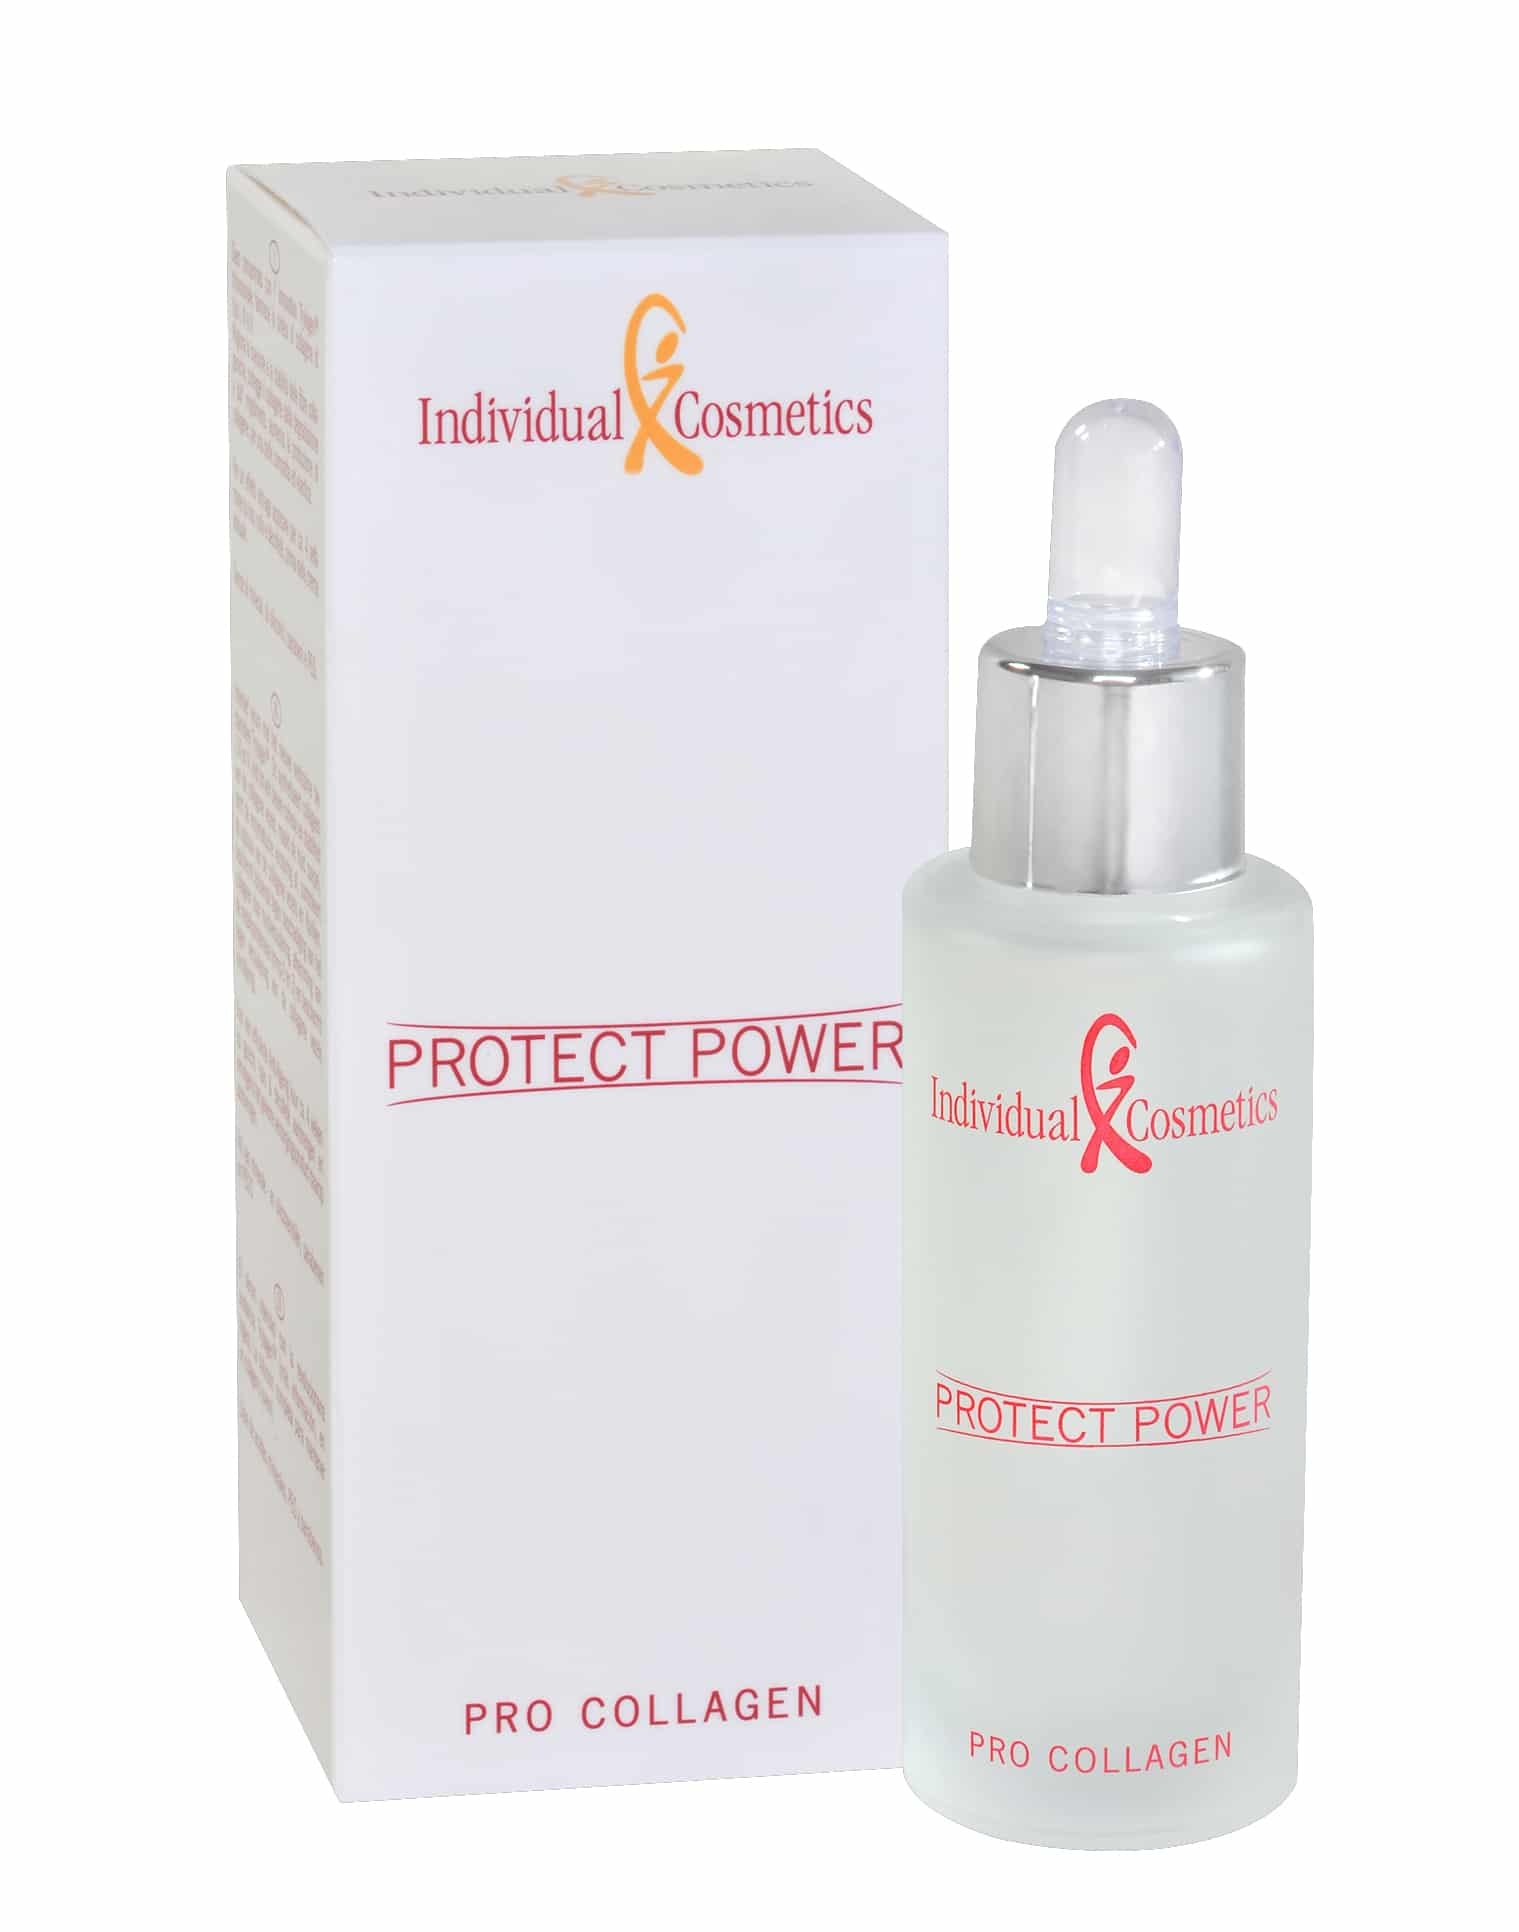 Individual Cosmetics Protect Power Pro Collagen